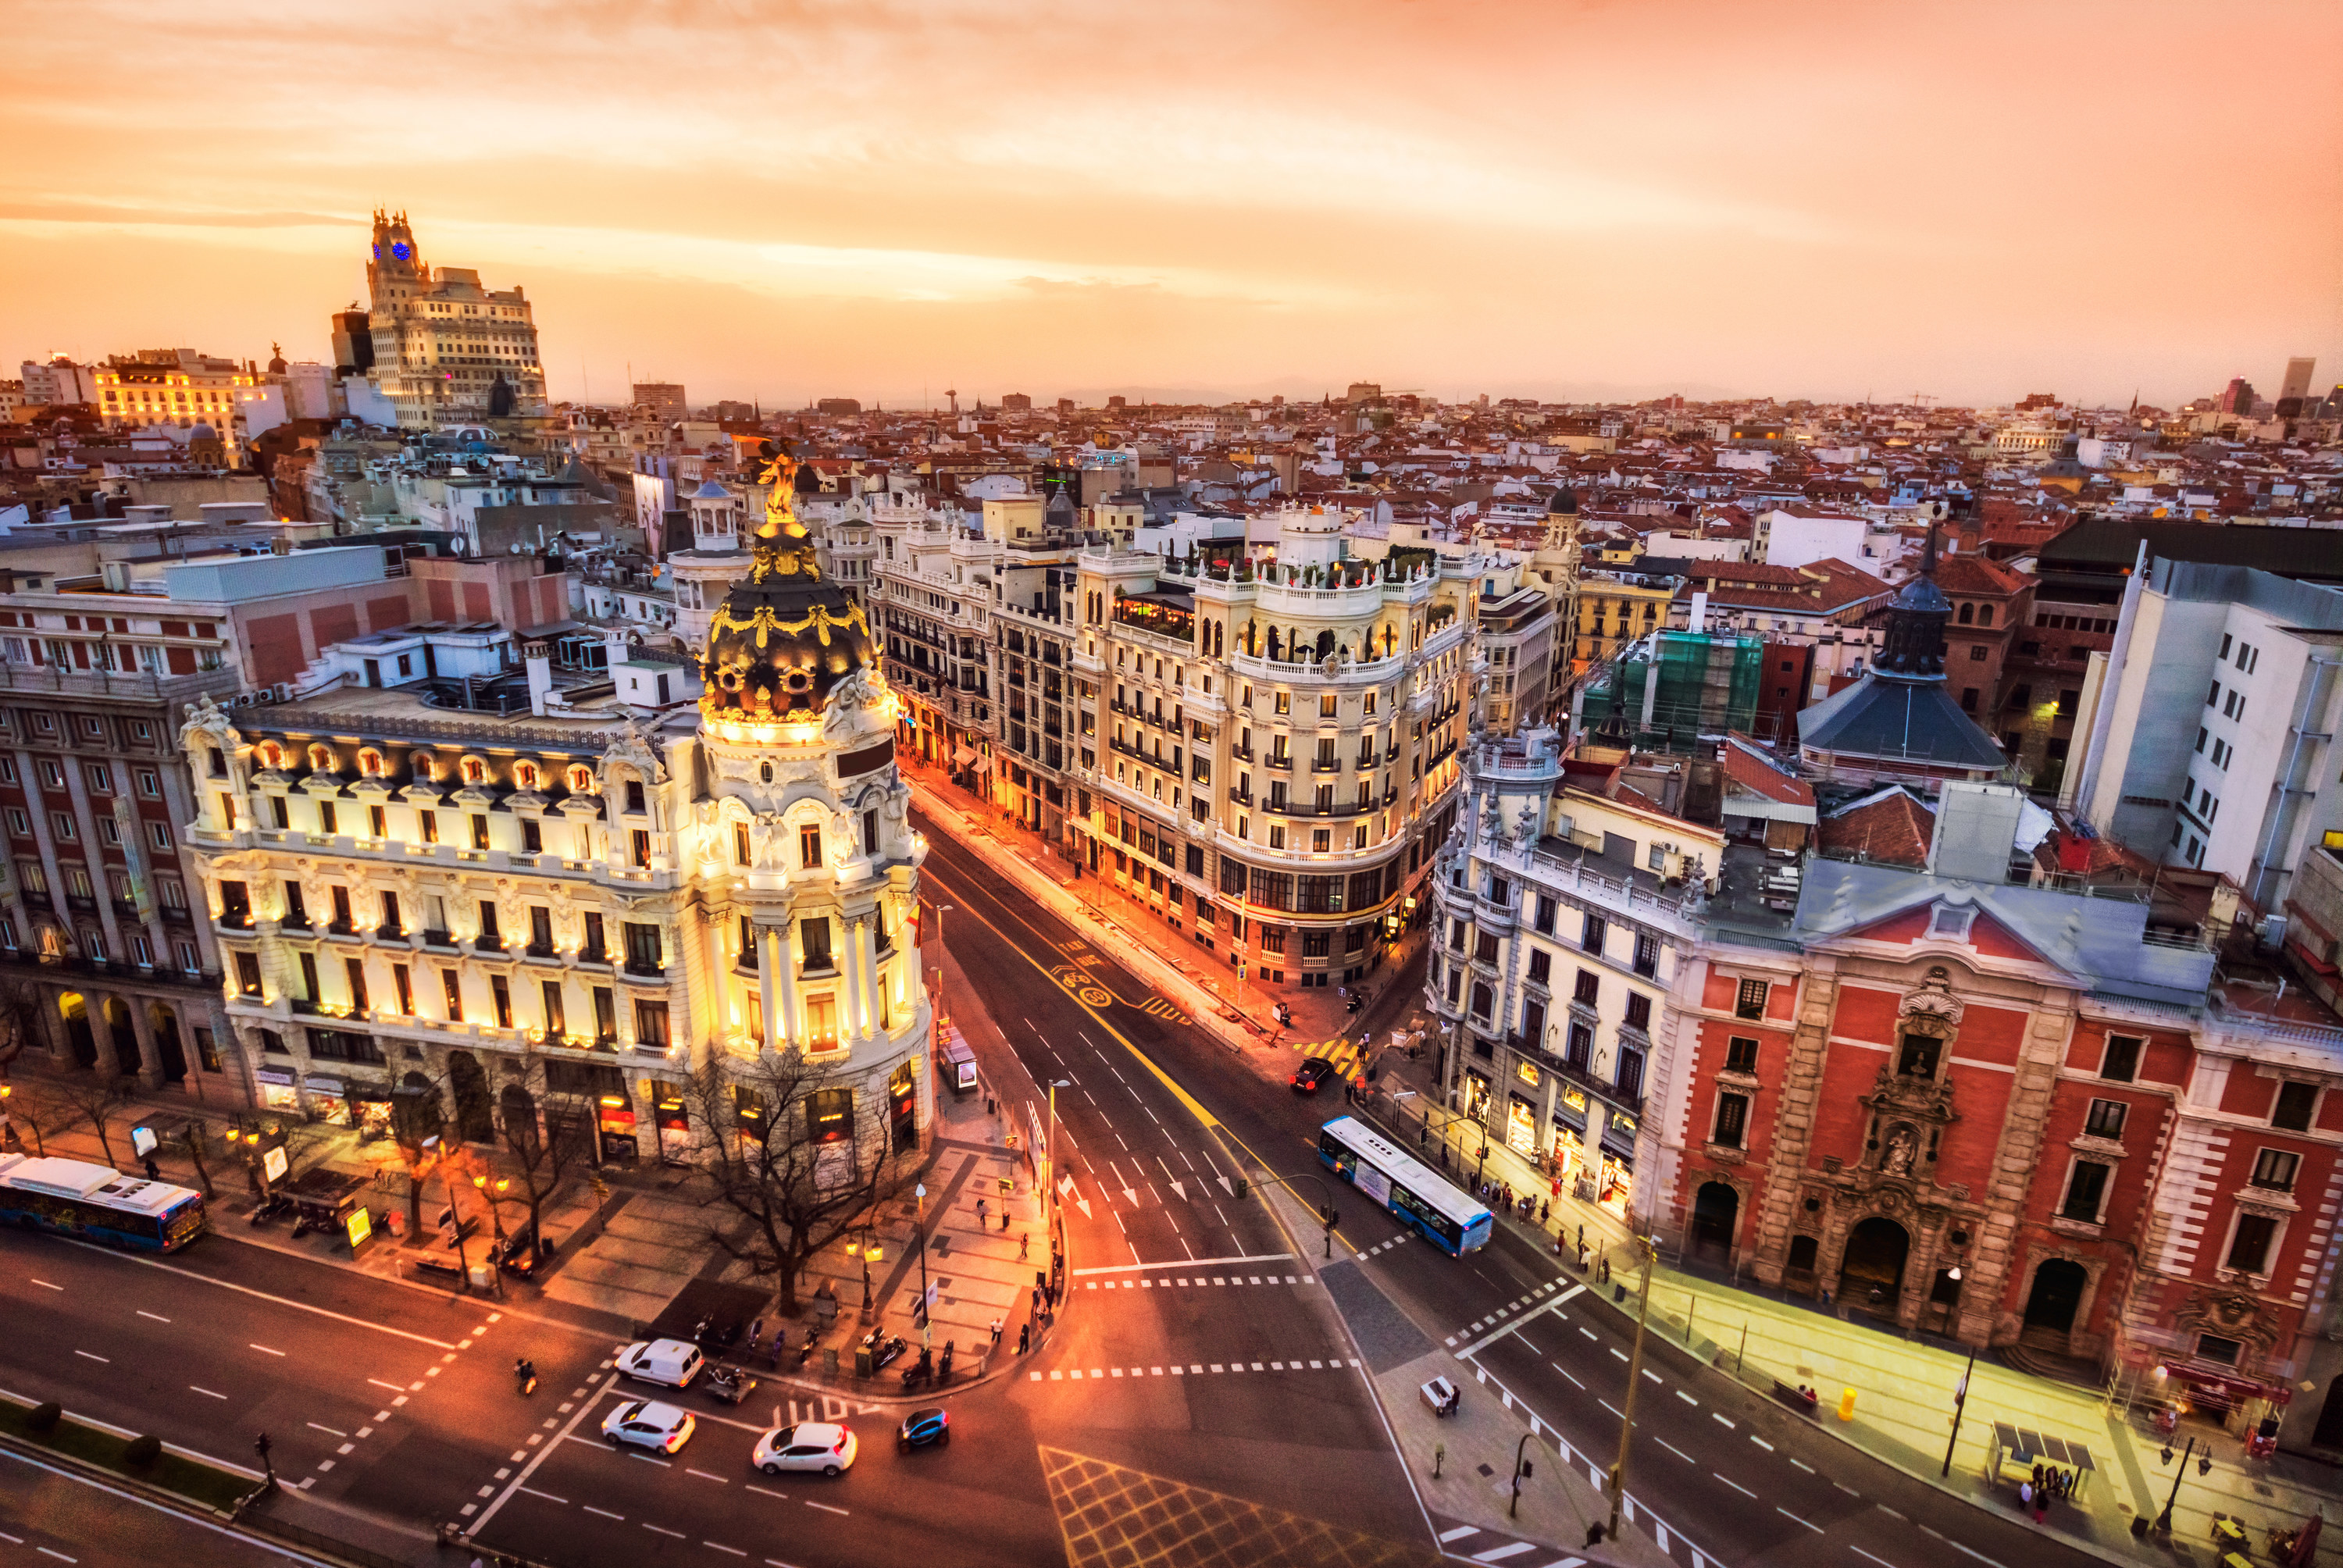 The Gran Via in Madrid, Spain, shot from above at dusk